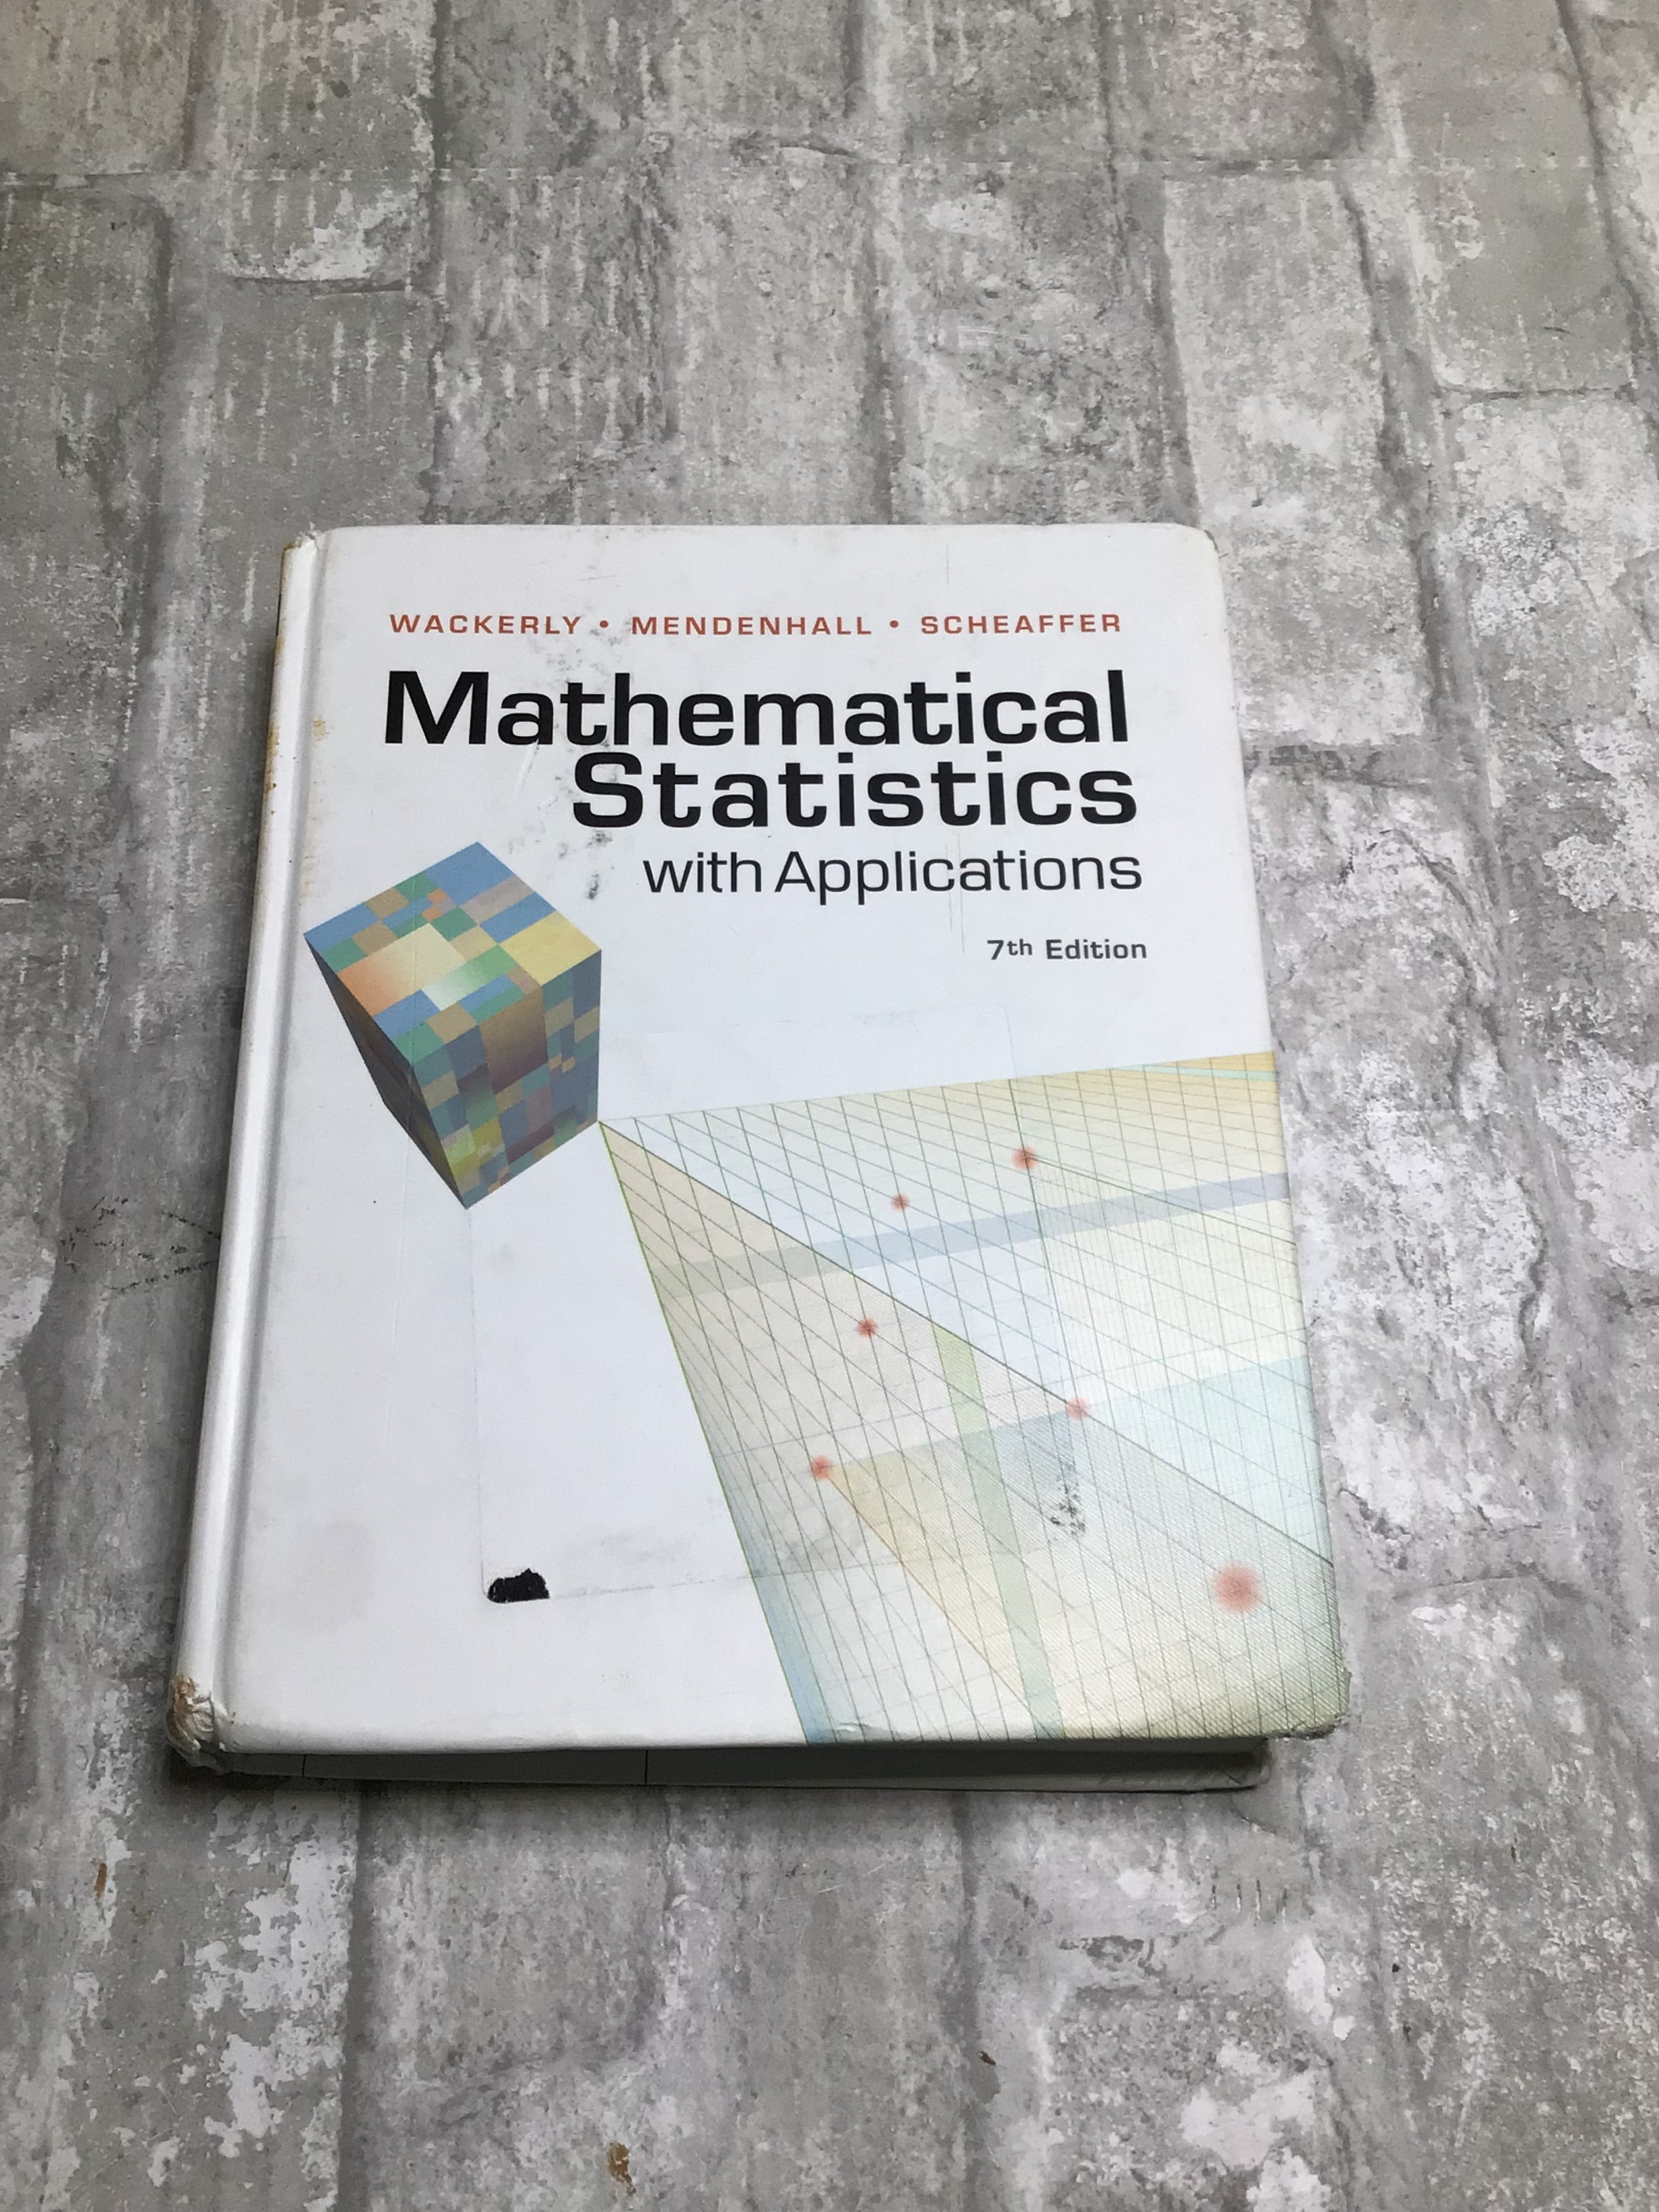 Mathematical Statistics with Applications 7th Edition (8219150418158)